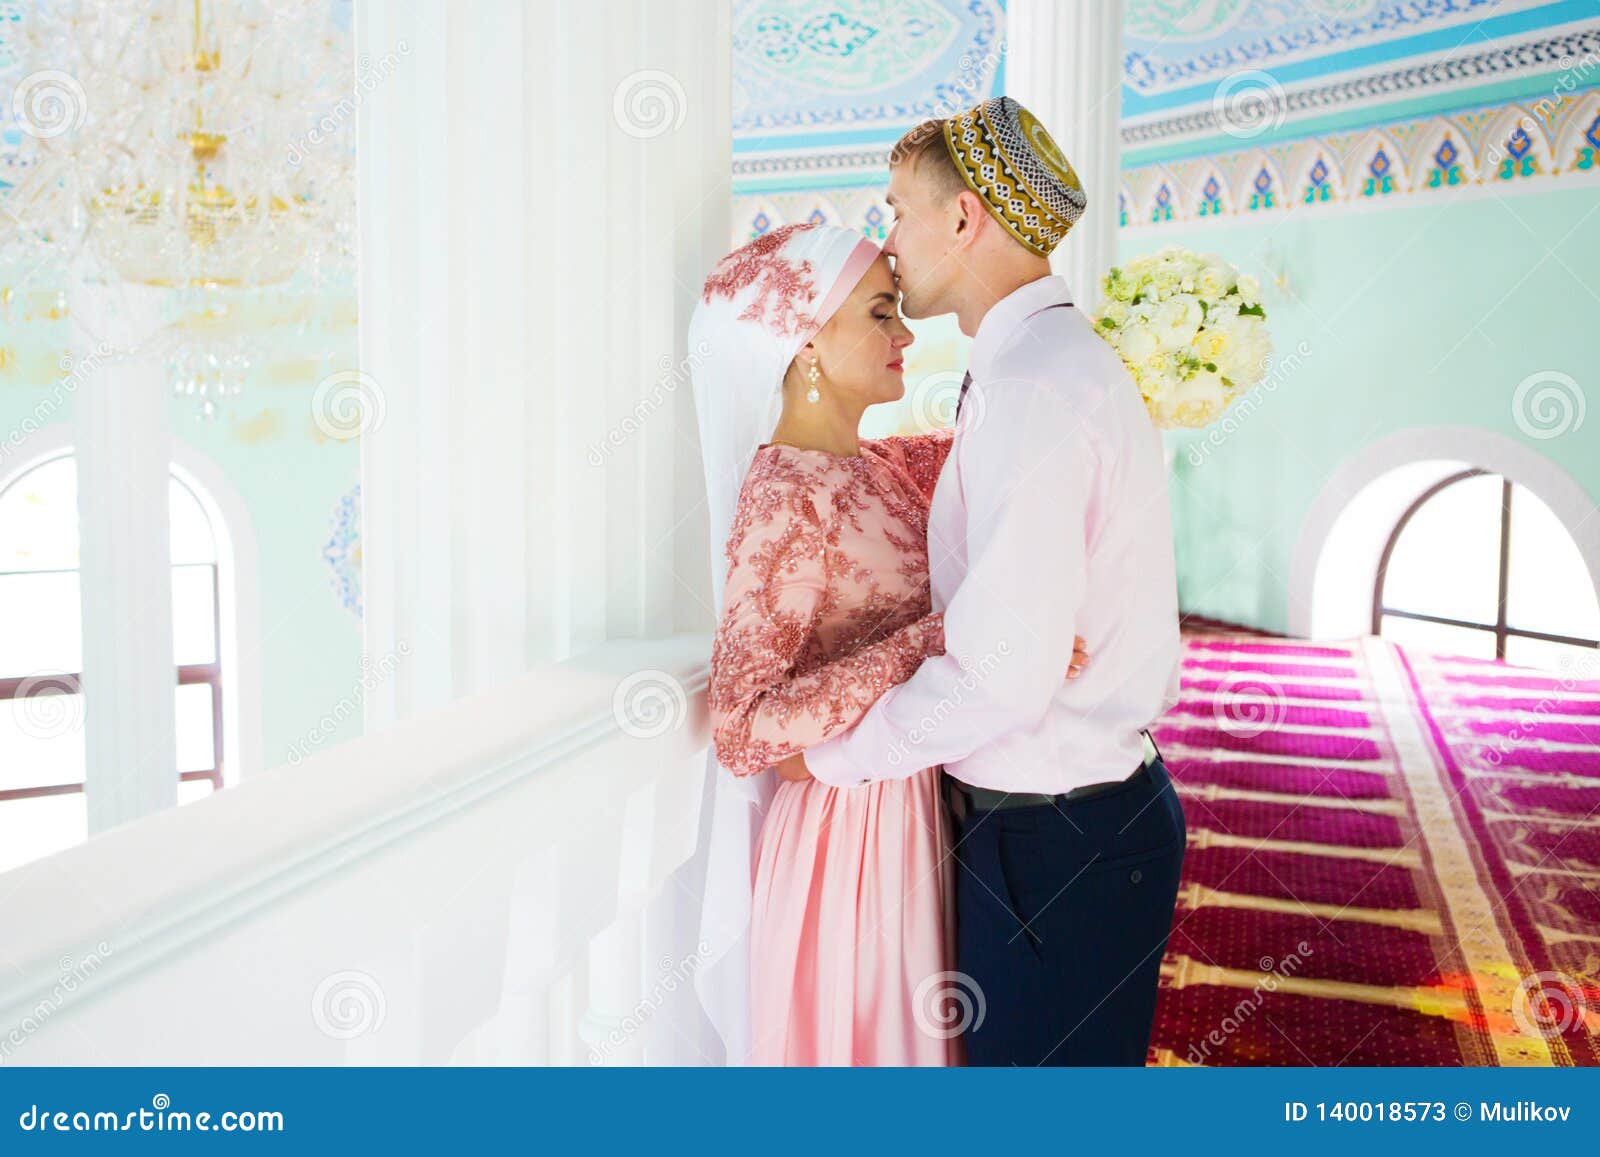 Muslim Wedding Couple Stock Images Download 350 Royalty Free Photos